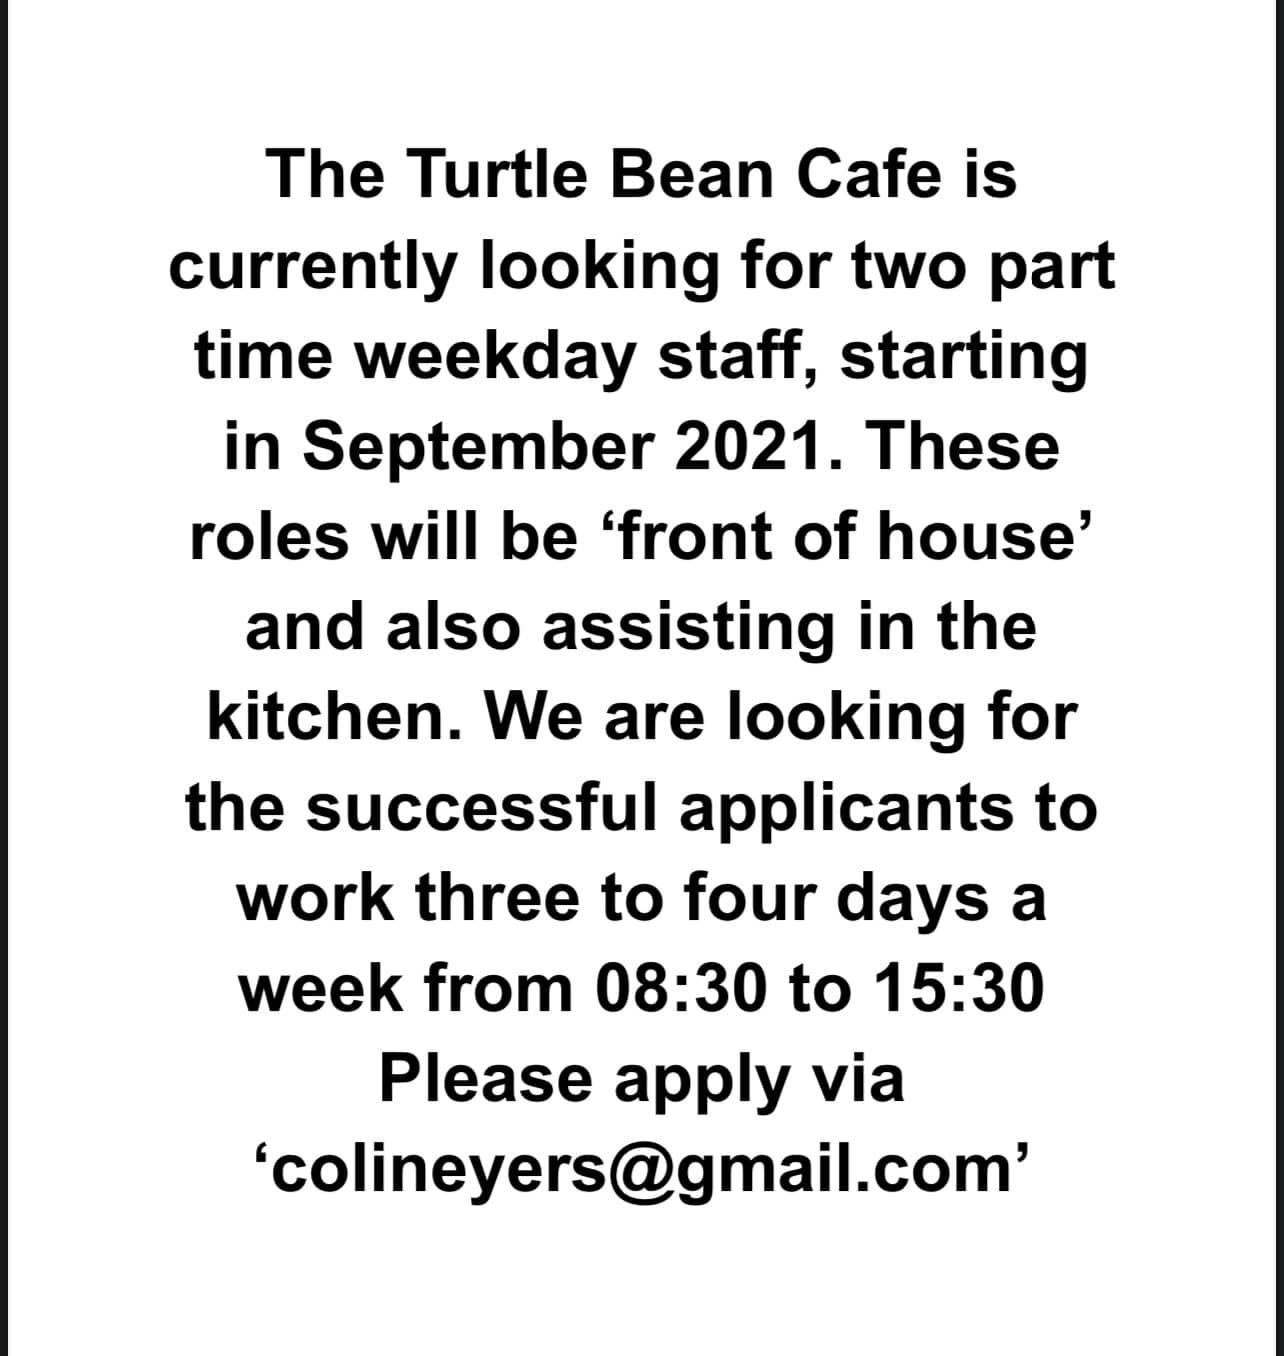 Turtle Bean Cafe